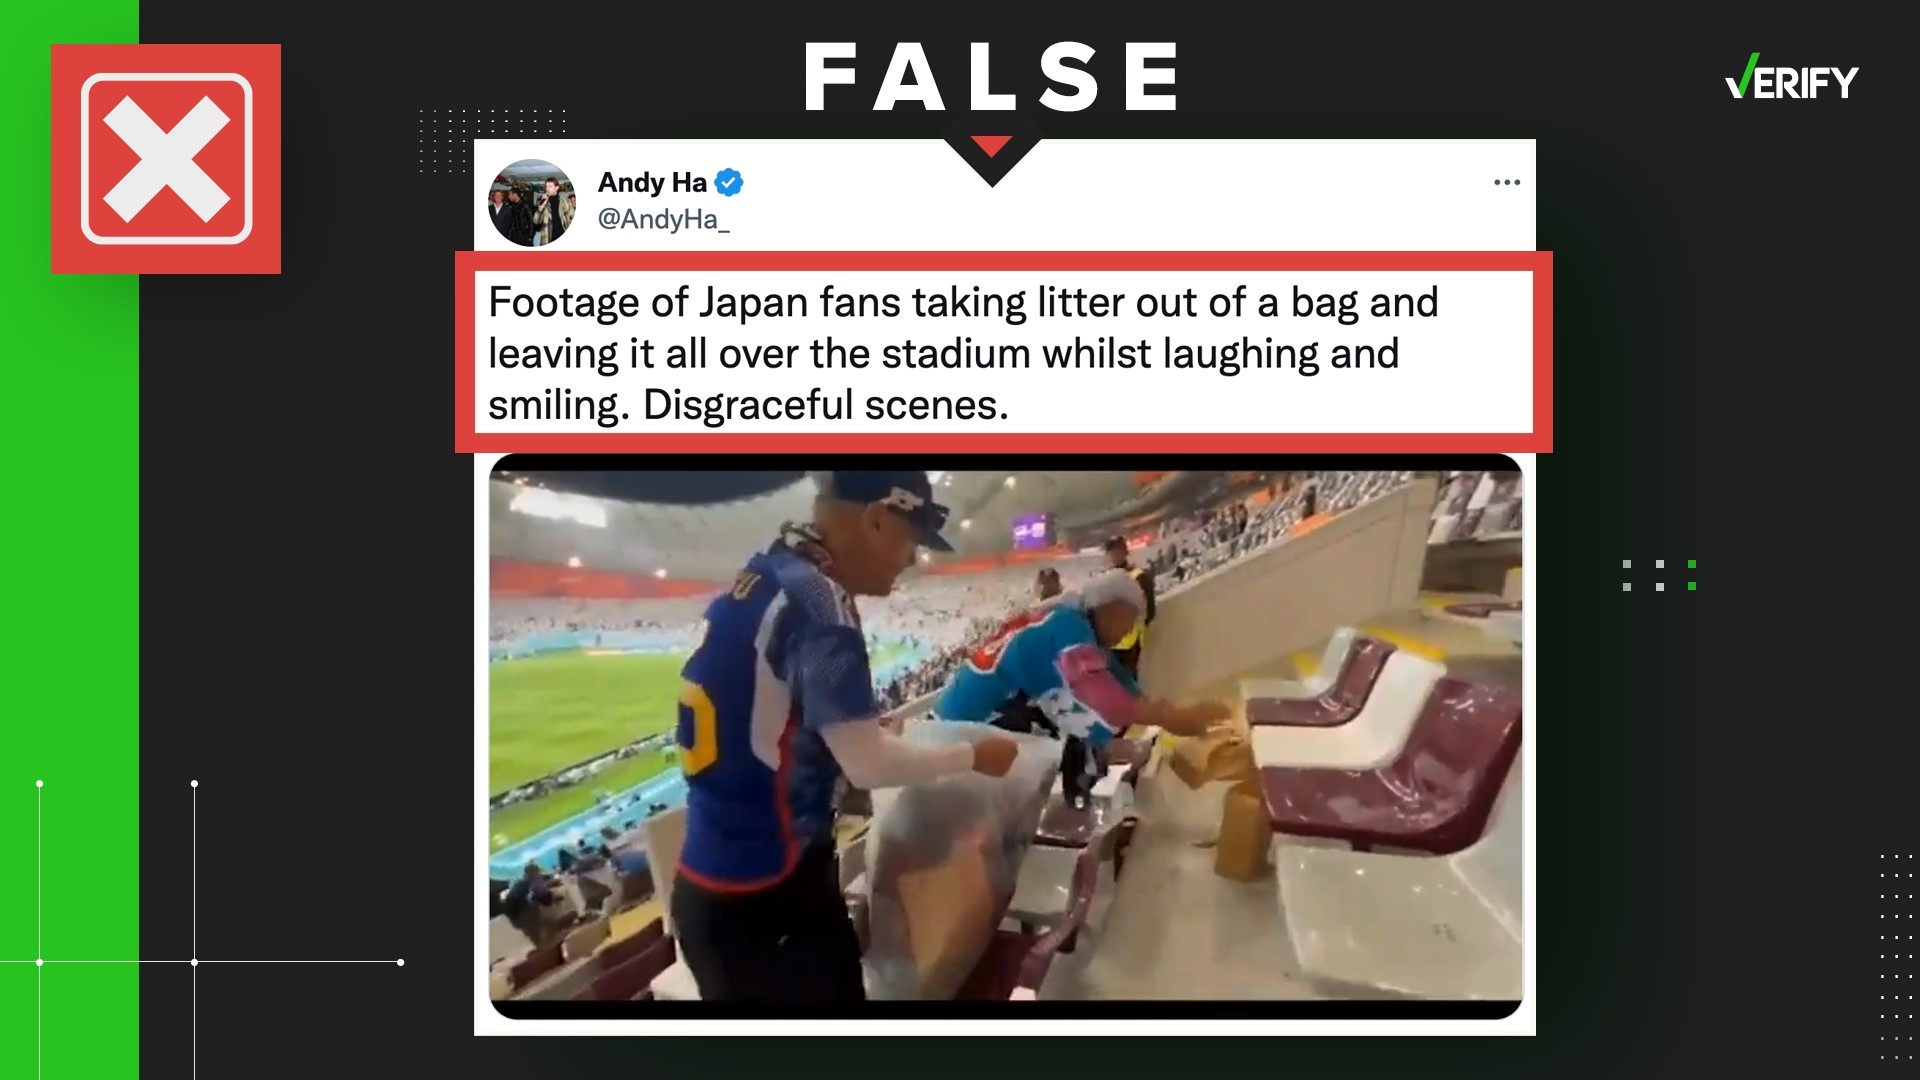 A viral video was reversed to claim Japanese fans were spreading trash in a World Cup stadium. The fans were actually picking up trash.